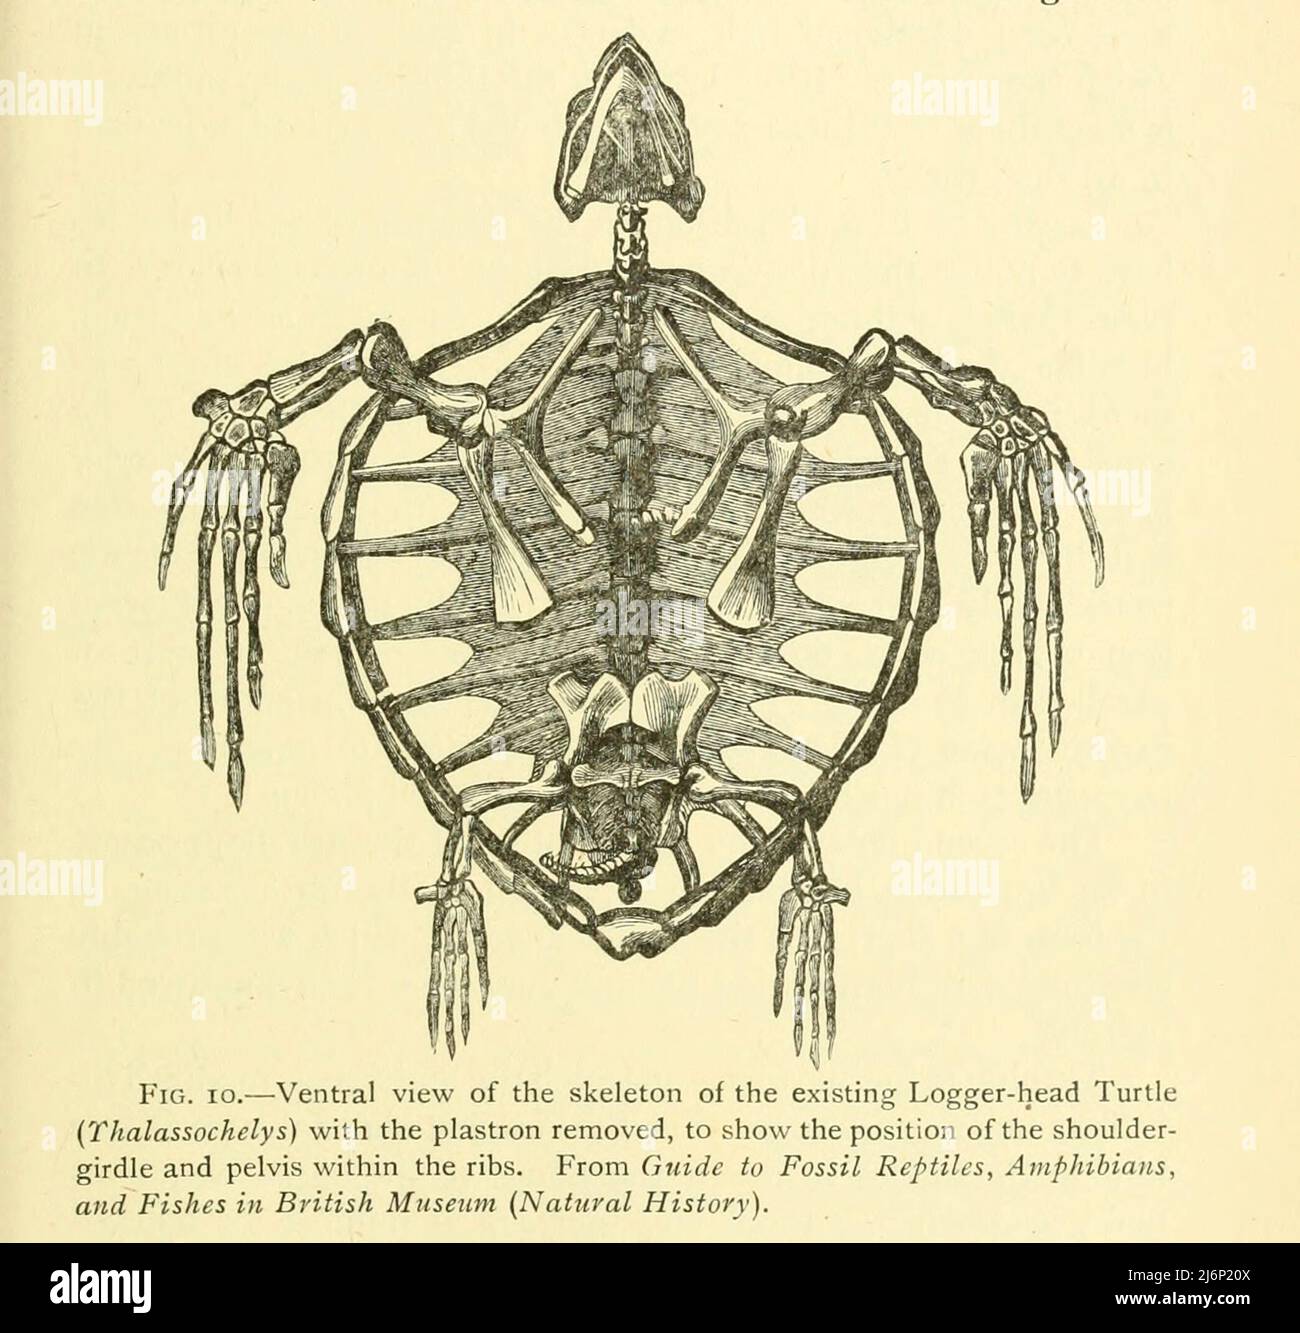 Ventral view of the skeleton of the existing Logger-head Turtle (Thalassochelys) with the plastron removed to show the position of the shoulder-girdle and pelvis within the ribs from the book ' Reptiles, amphibia, fishes and lower chordata ' by Joseph Thomas Cunningham, Richard Lydekker, George Albert Boulenger, John Arthur Thomson, Publication date 1912 Publisher London : Methuen Stock Photo